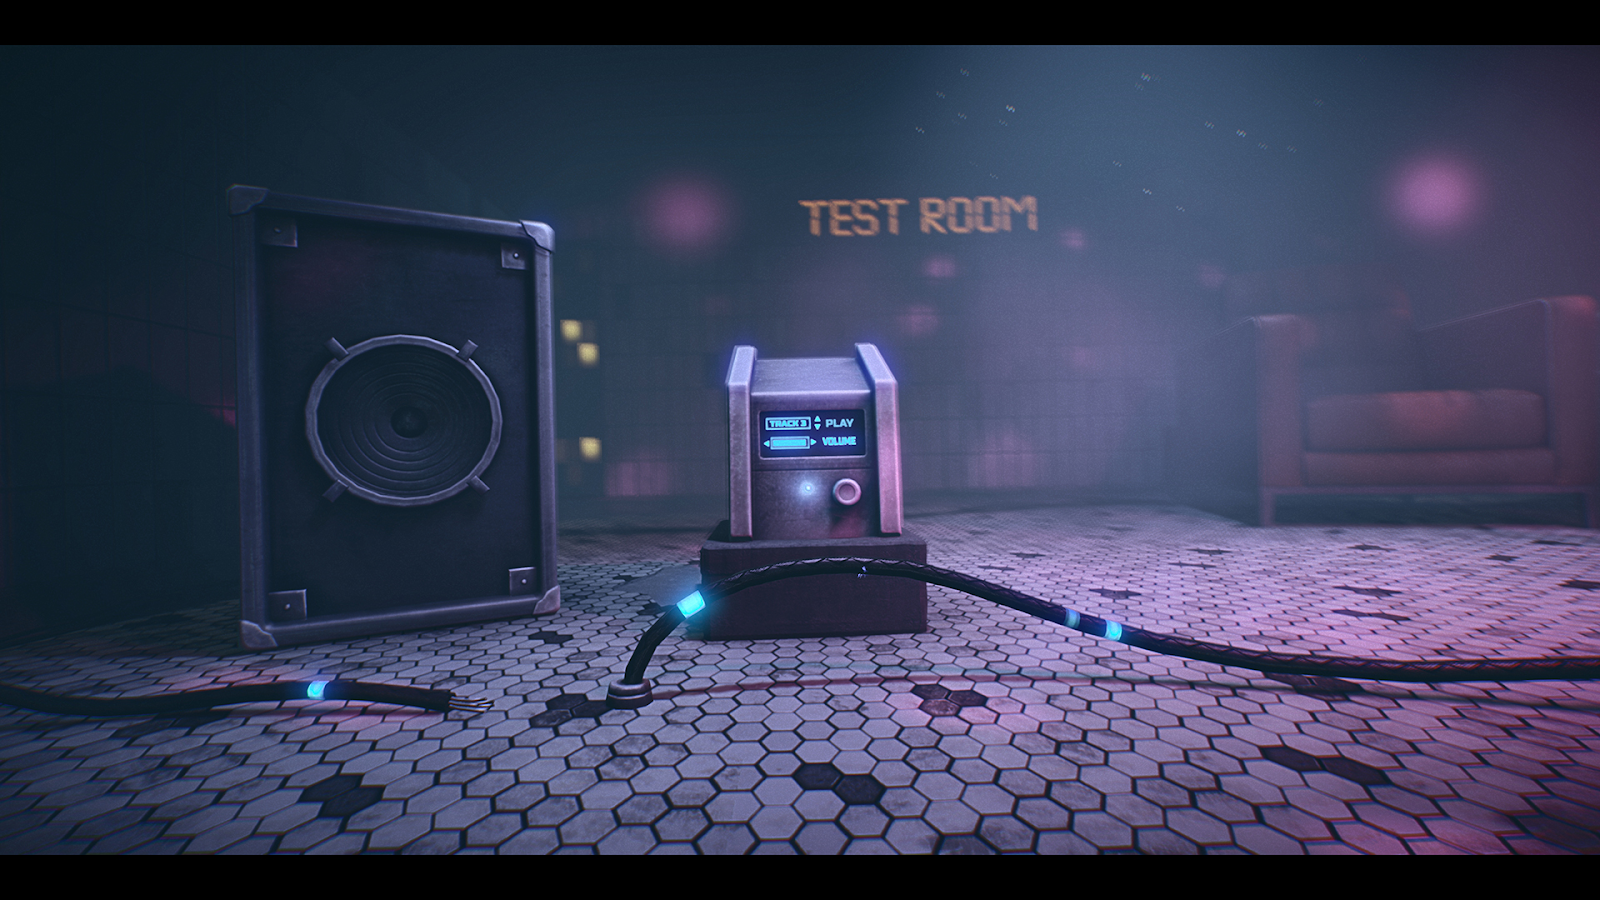 A screenshot showing the test room